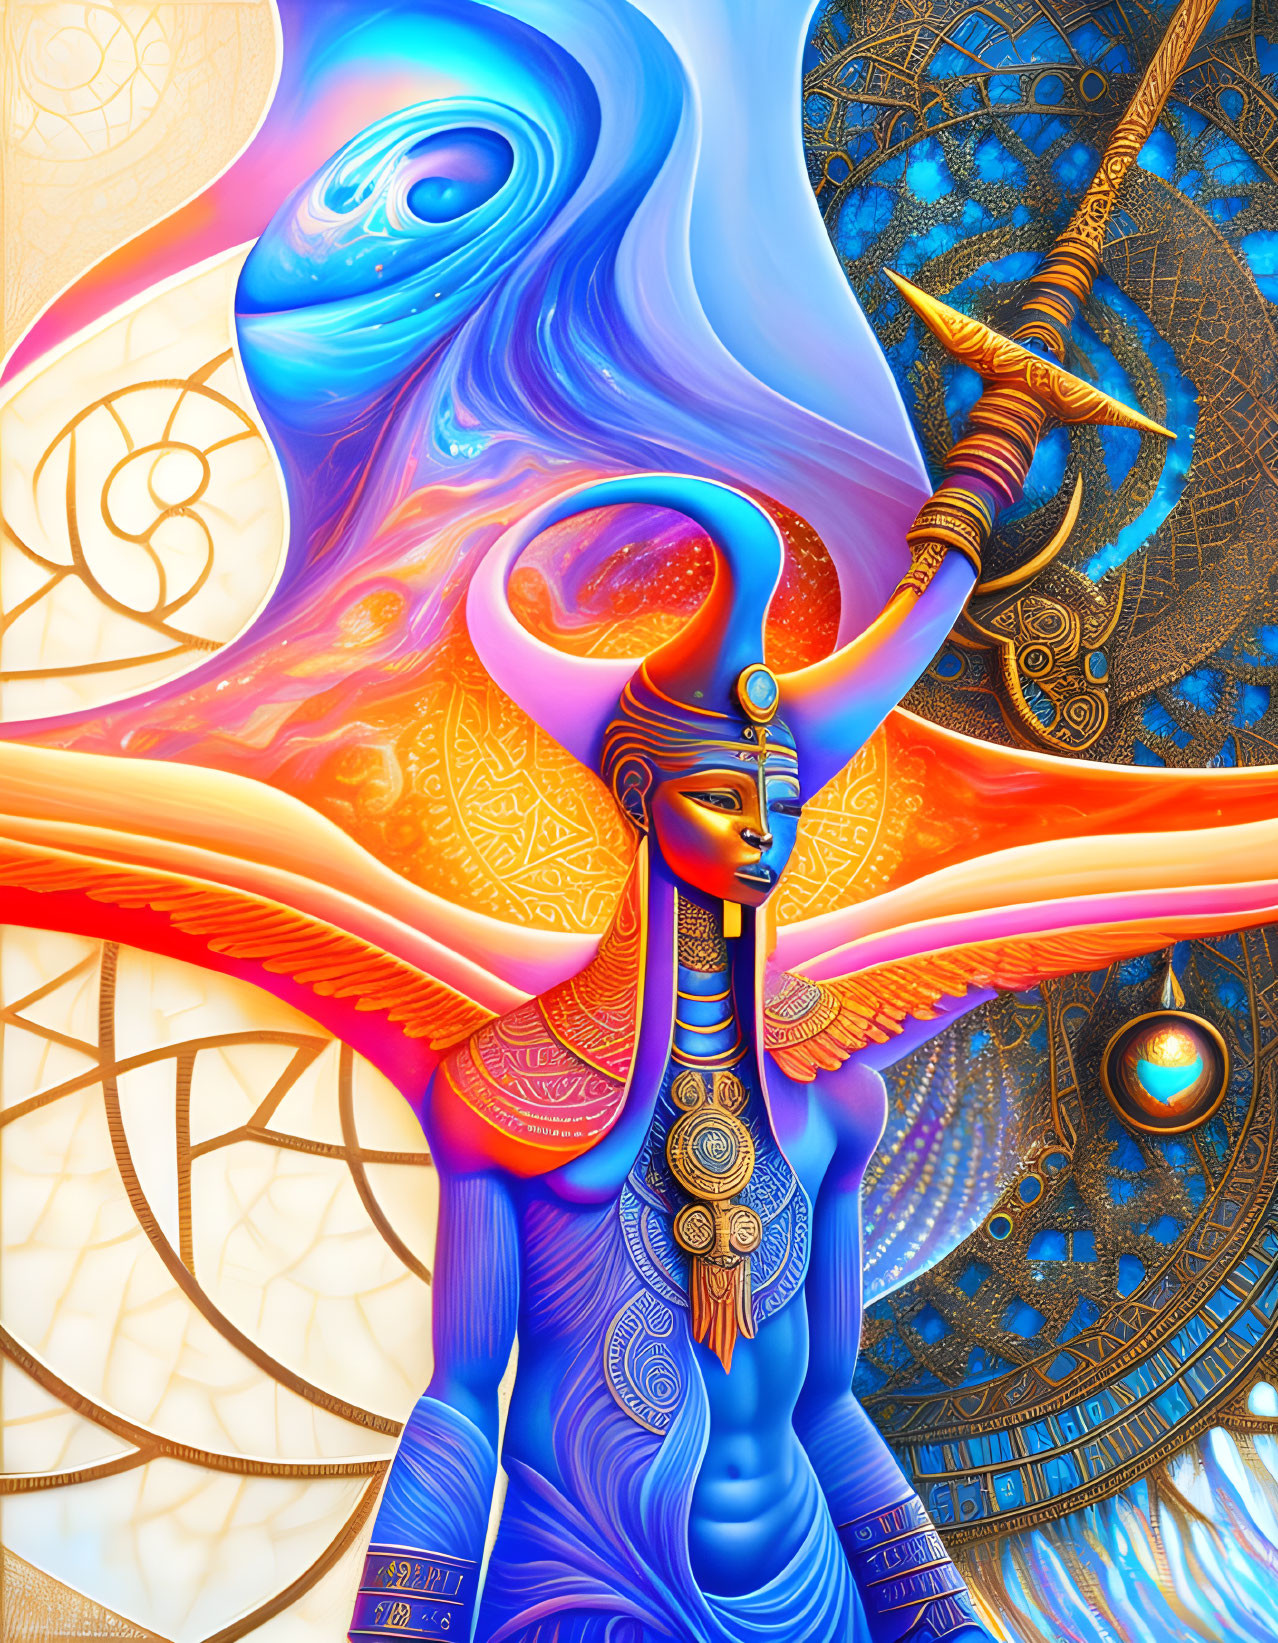 Colorful Psychedelic Illustration of Blue-Skinned Figure with Egyptian Headdress